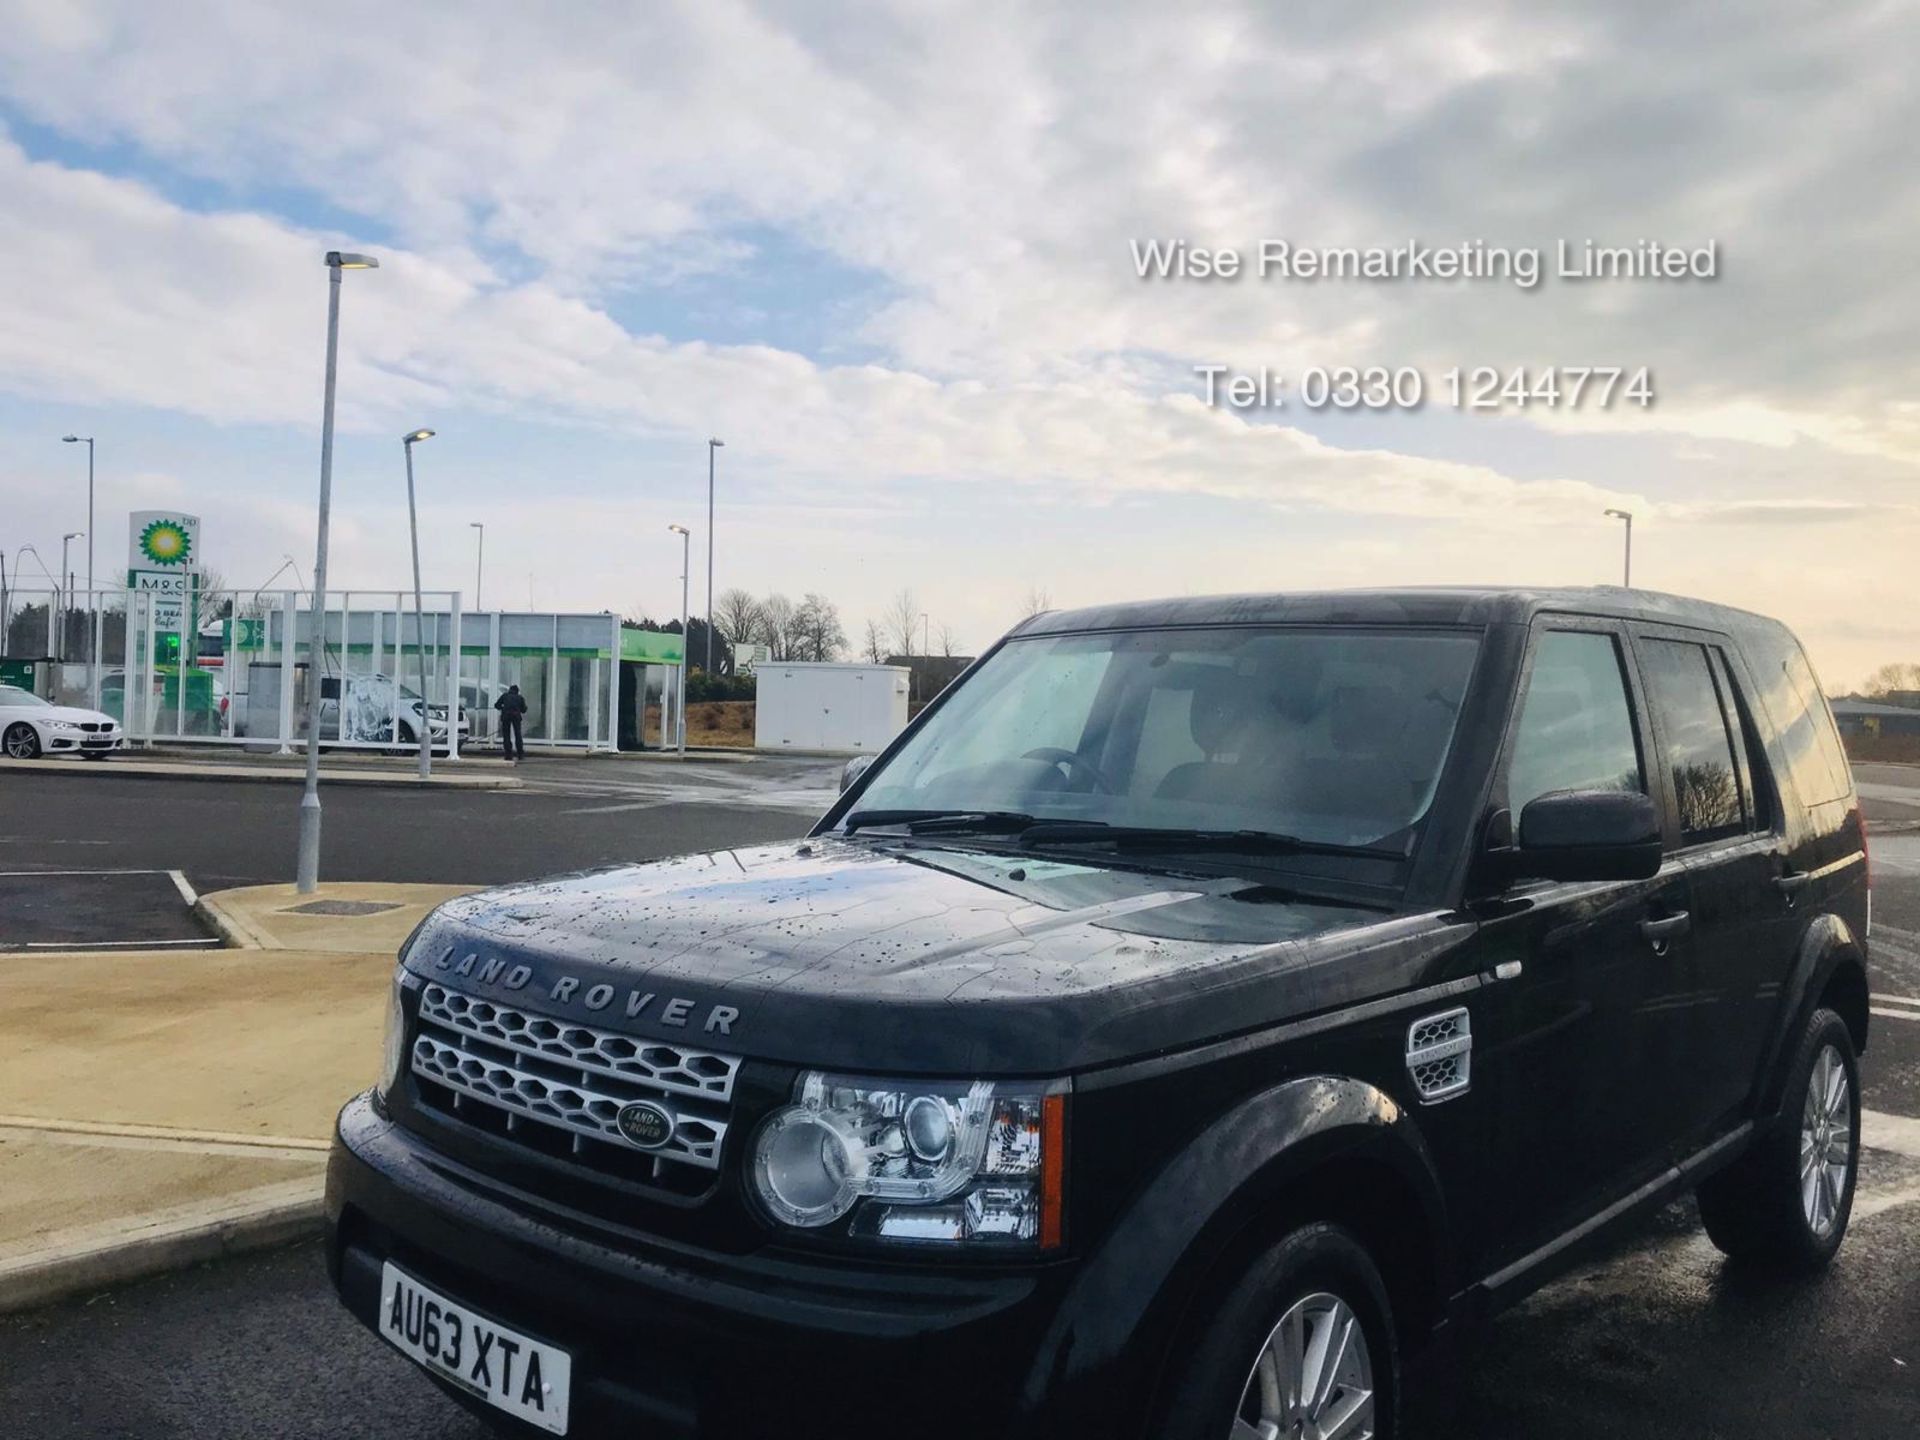 Land Rover Discovery GS 3.0 SDV6 Auto - 2014 Model - 7 Seater - 1 Owner From New - Image 2 of 19